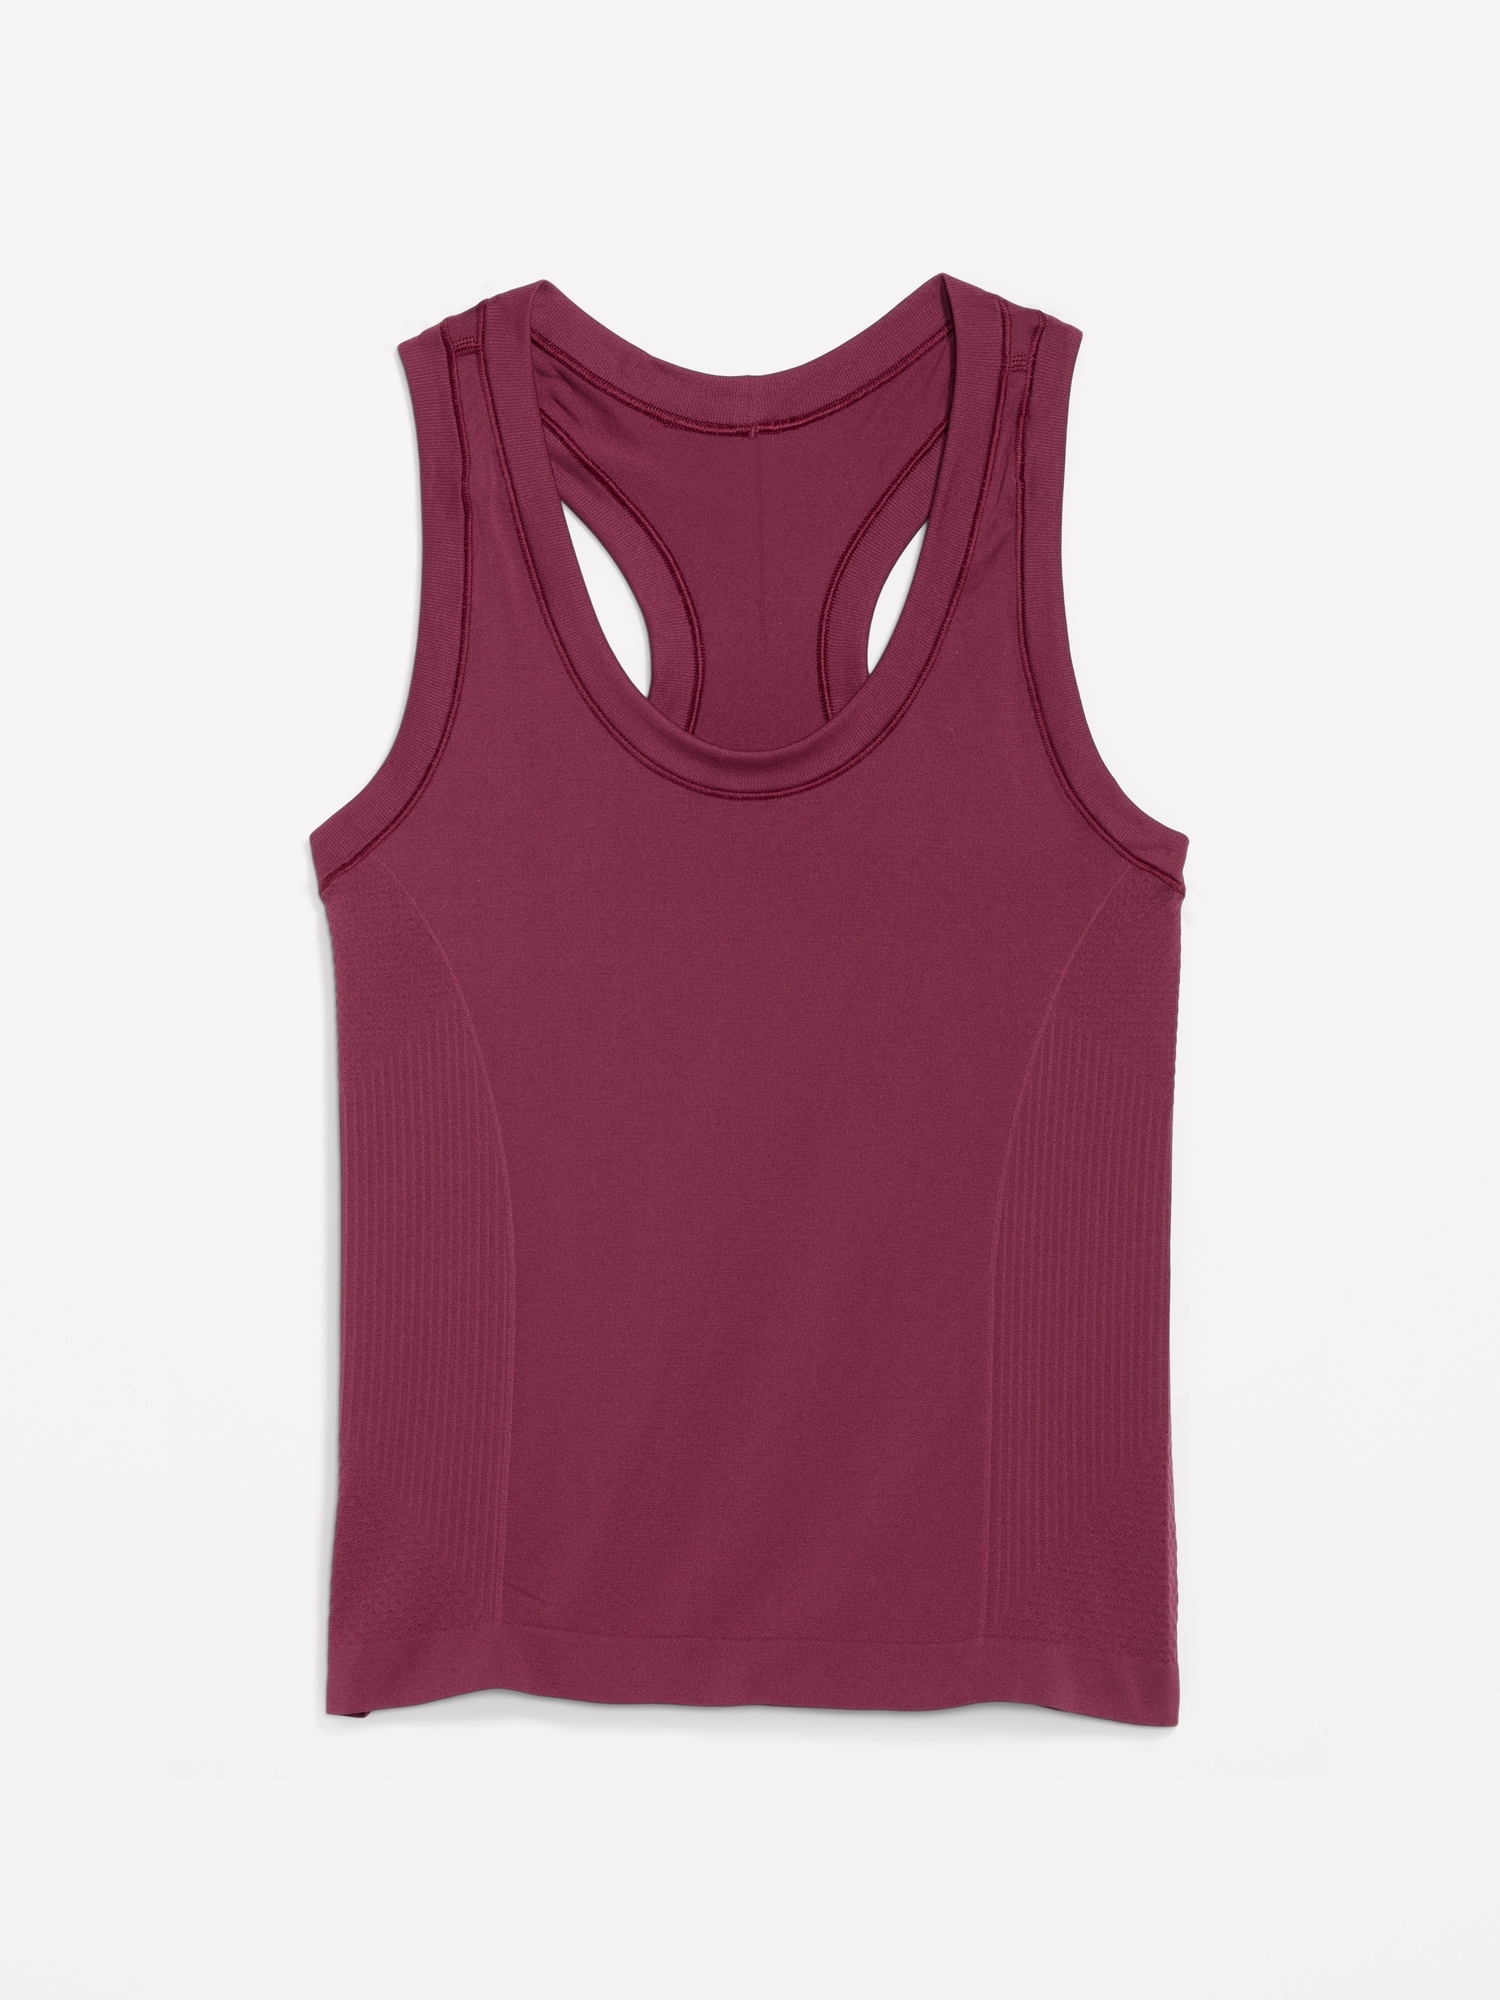 Old Navy Women's Seamless Performance Racerback Cropped Tank Top Size Small  $27